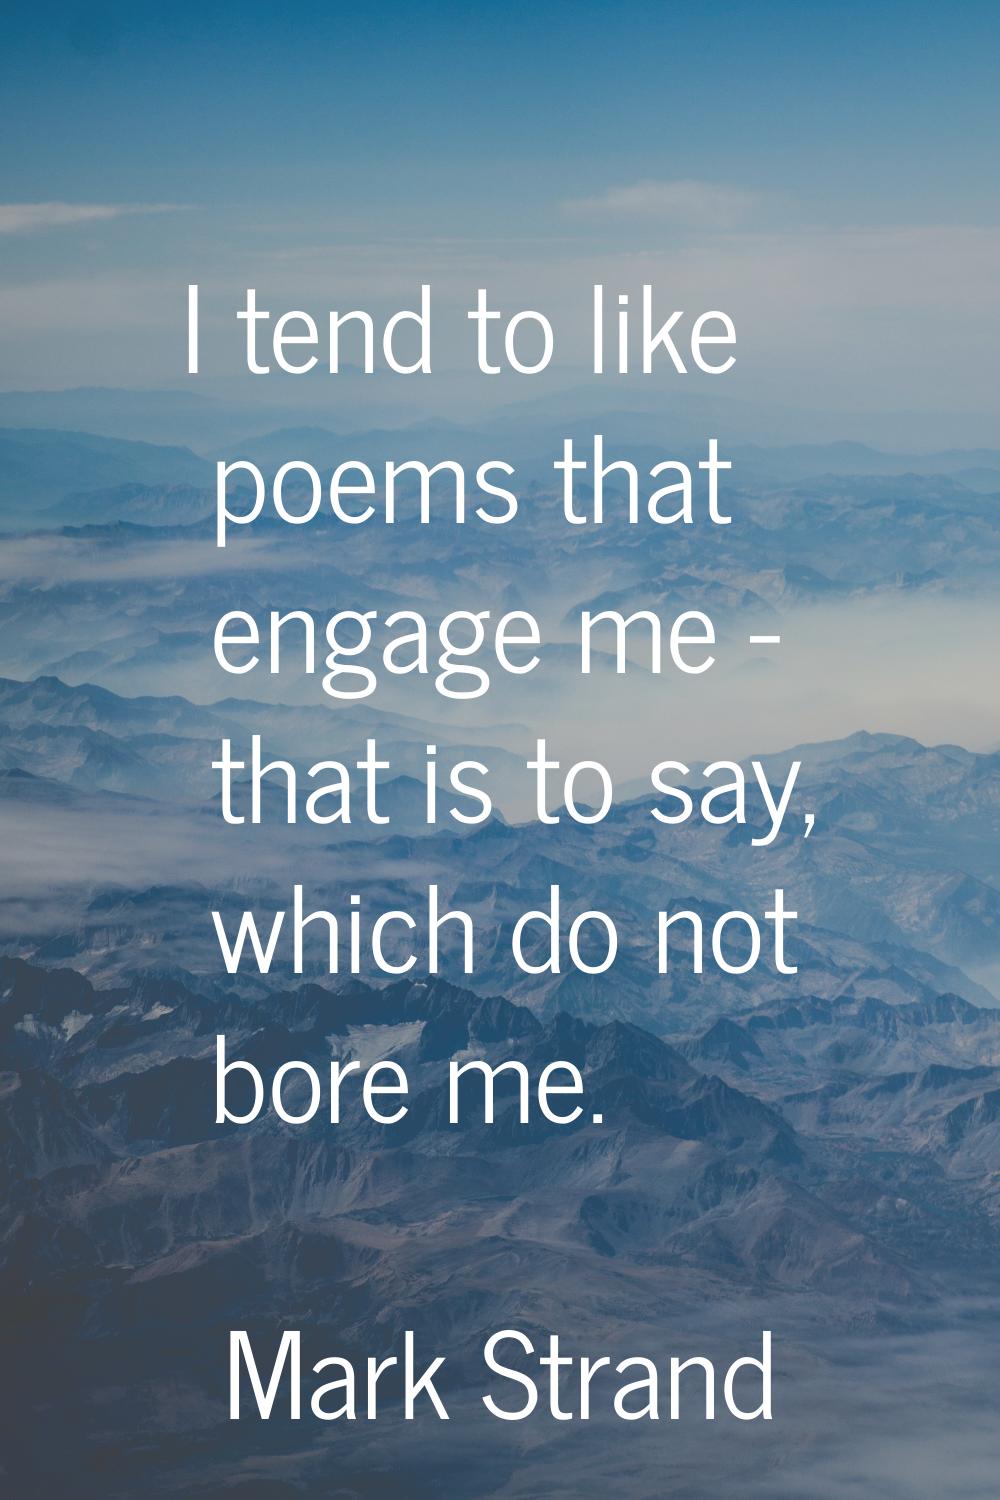 I tend to like poems that engage me - that is to say, which do not bore me.